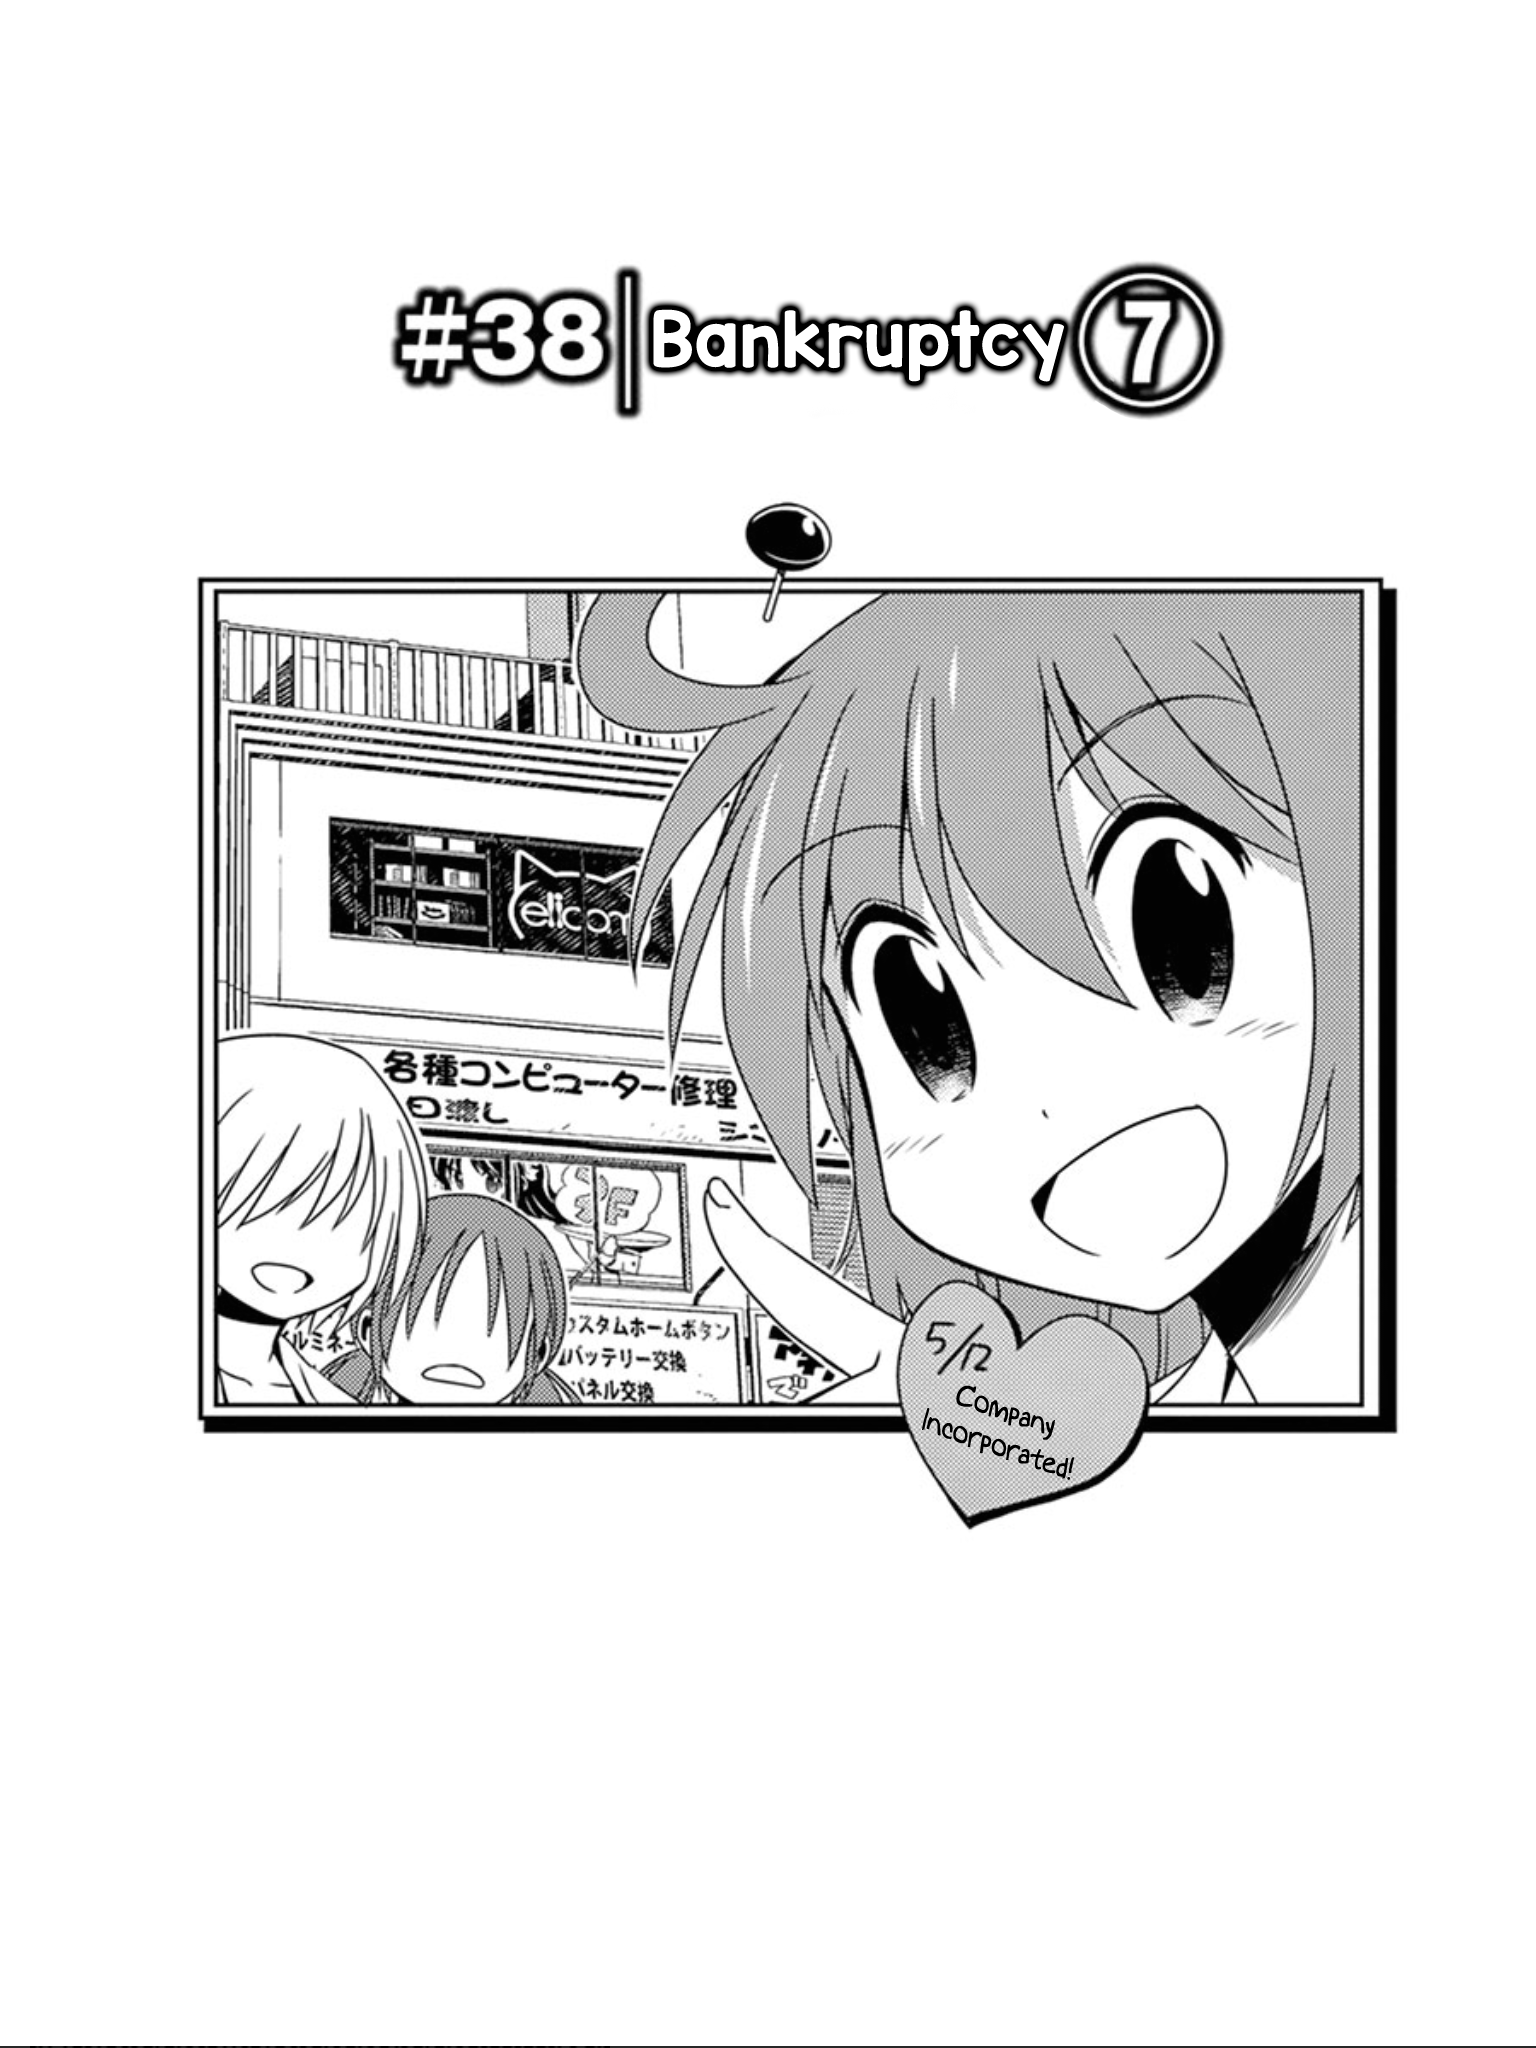 Eroge No Taiyou Vol.4 Chapter 38: Bankruptcy (7) - Picture 2